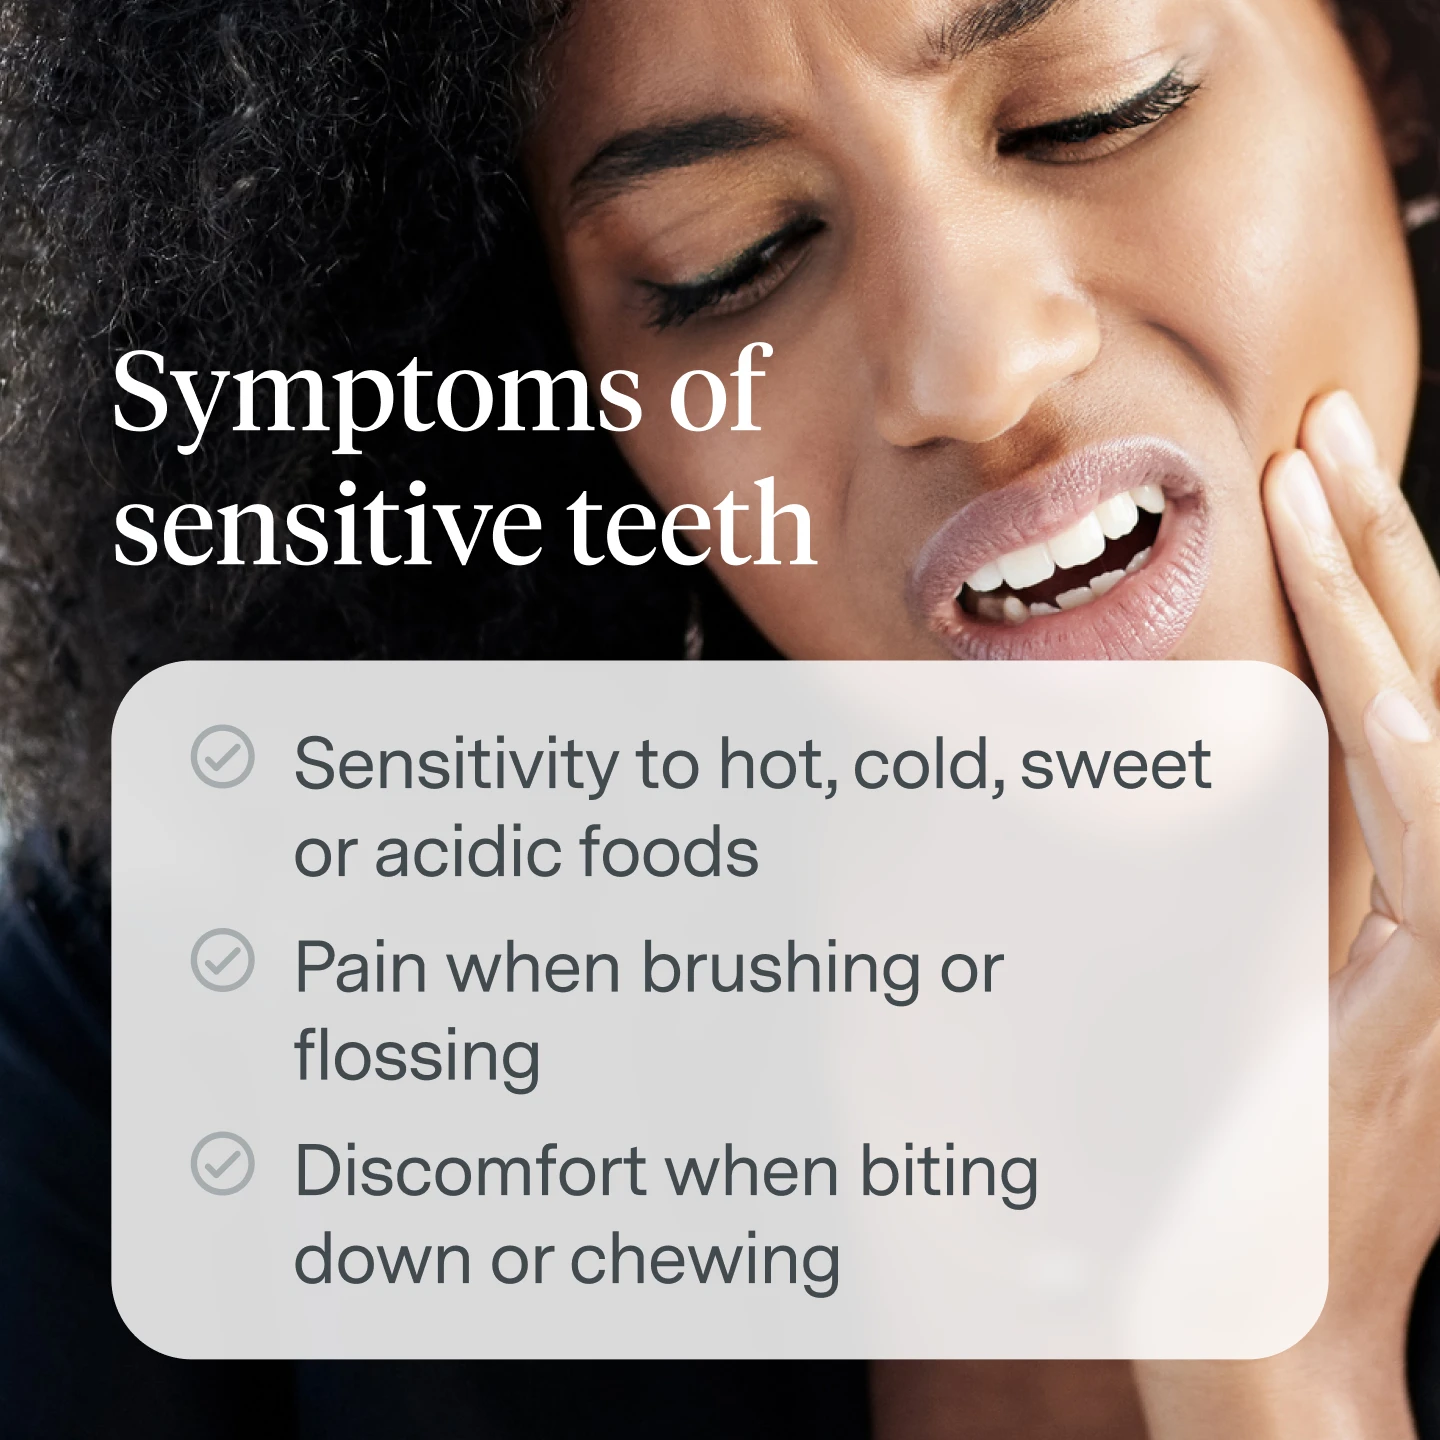 Symptoms of Sensitive Teeth:
Sensitivity to hot, cold, sweet or acidic foods
Pain when brushing or flossing
Discomfort when biting down or chewing